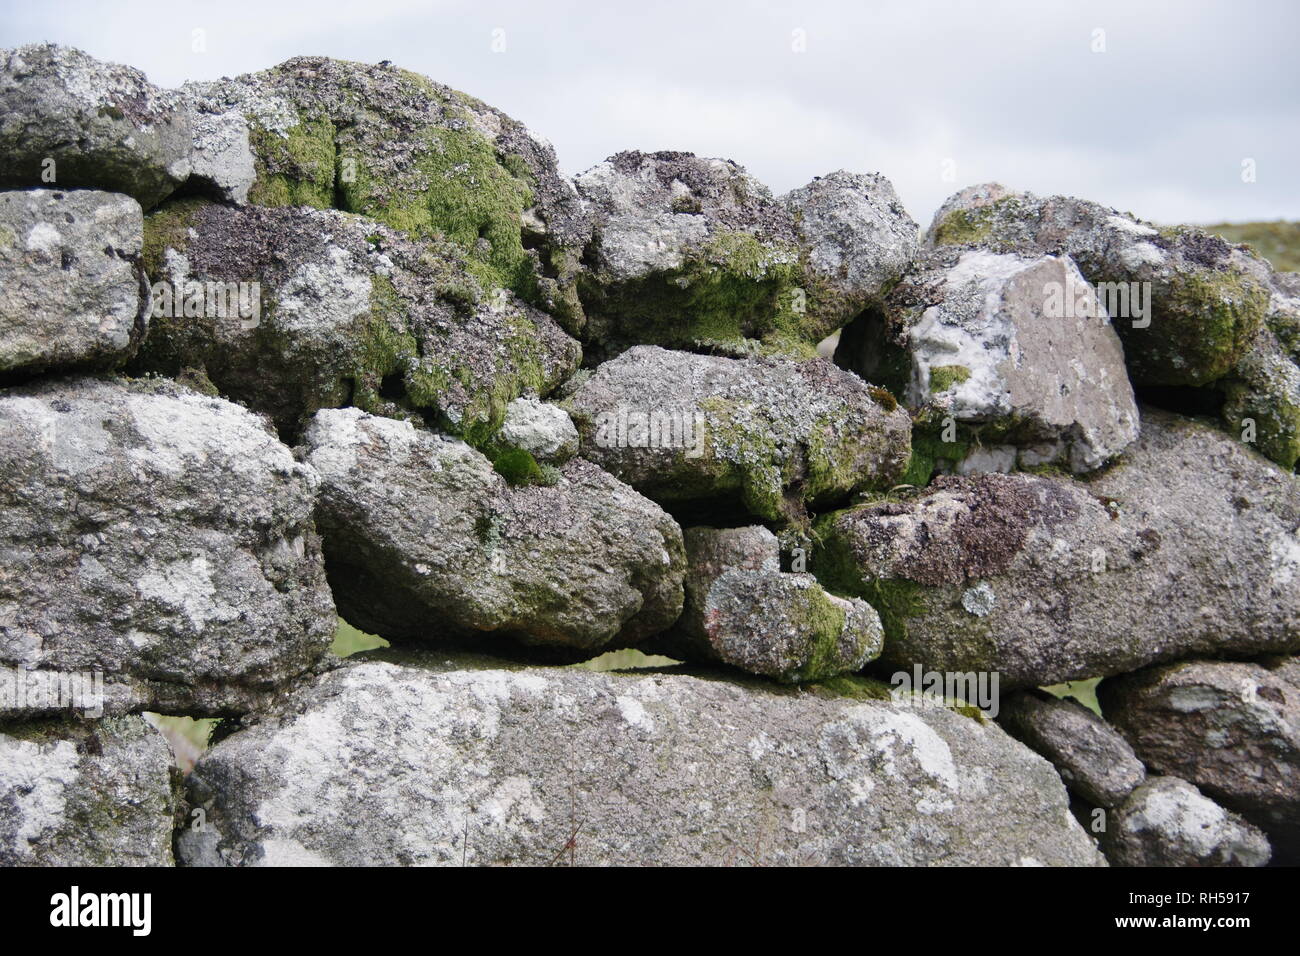 Close Up of a lichen Mottled Drystone Wall. Dartmoor National Park, Devon, UK. Stock Photo